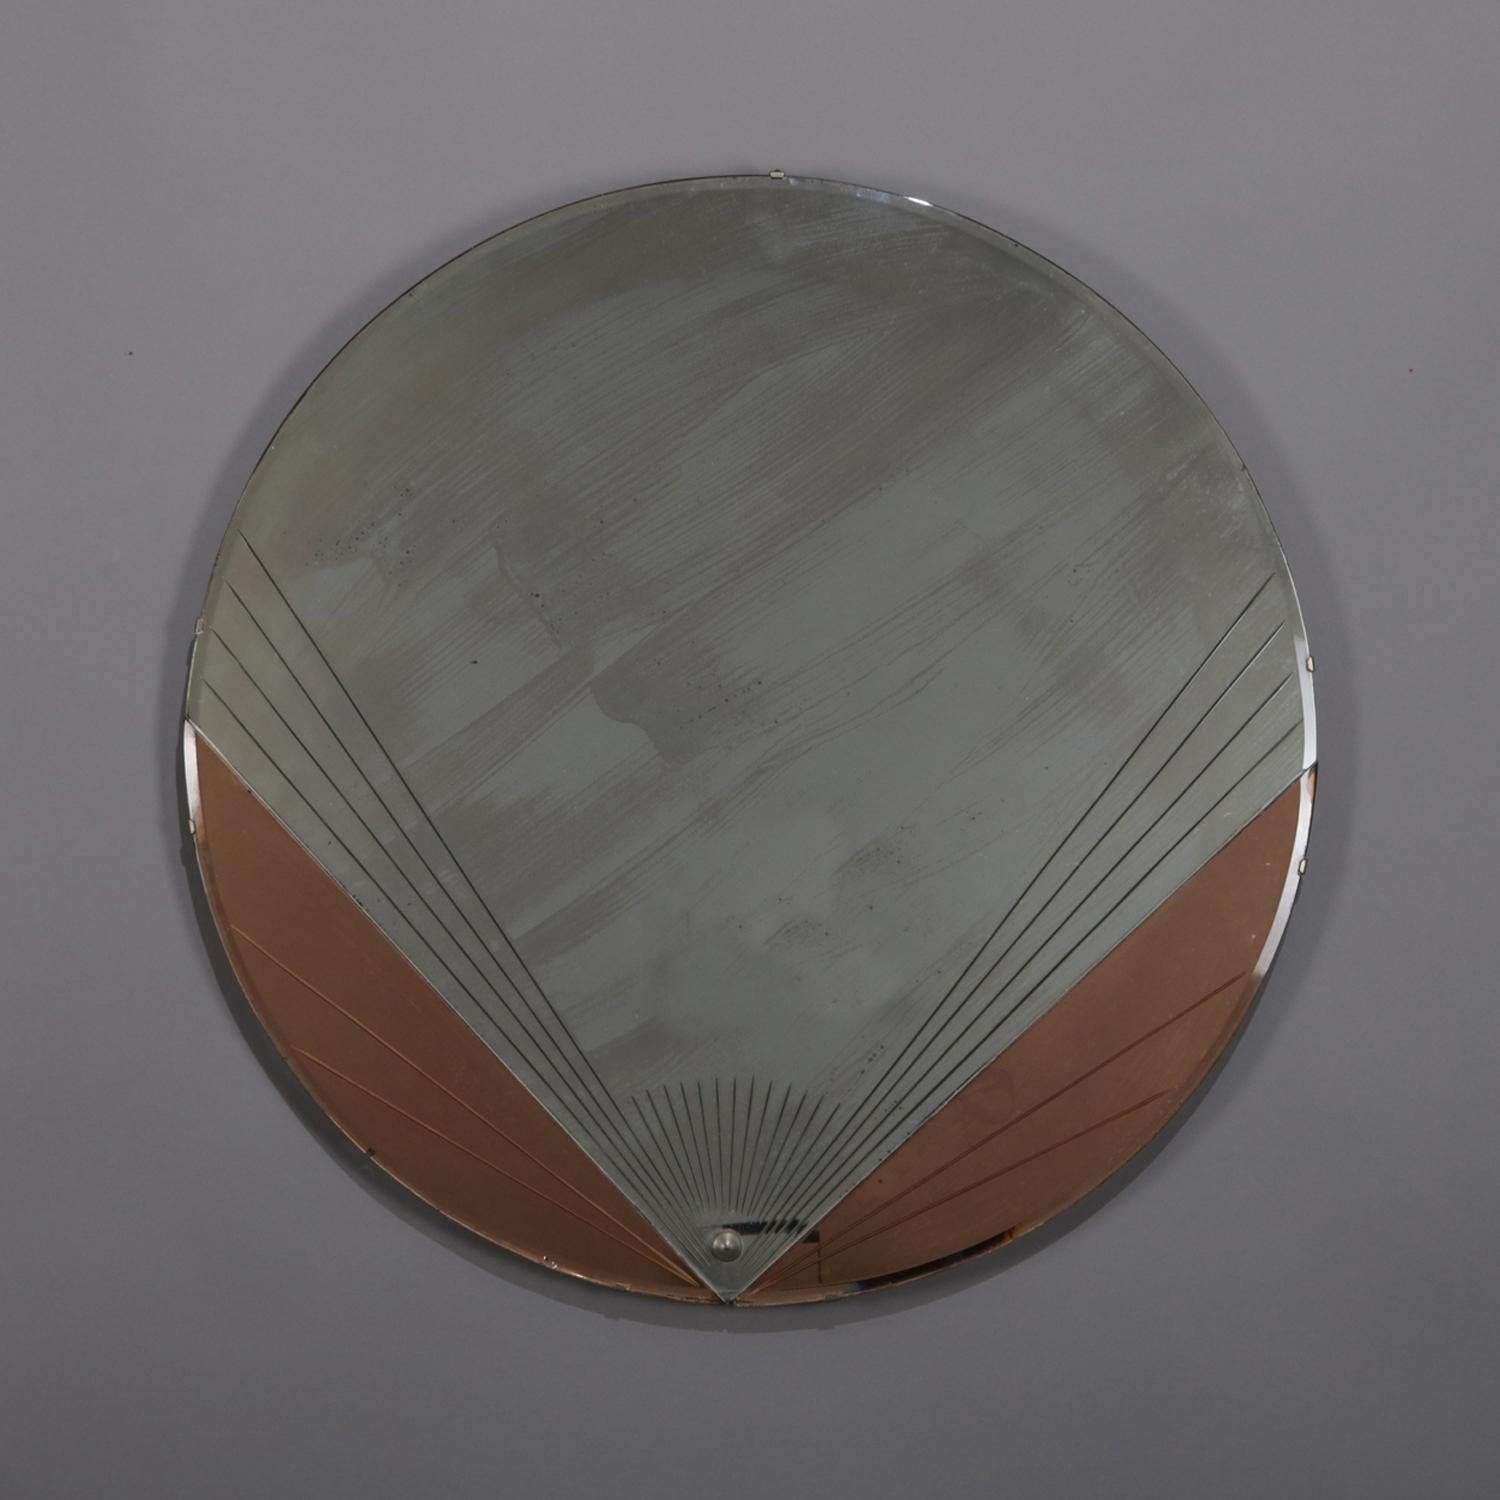 Antique Art Deco wall mirror features circular form with stylized fan in two-toned copper and silver backing, en verso original label, circa 1920

Measures: 28